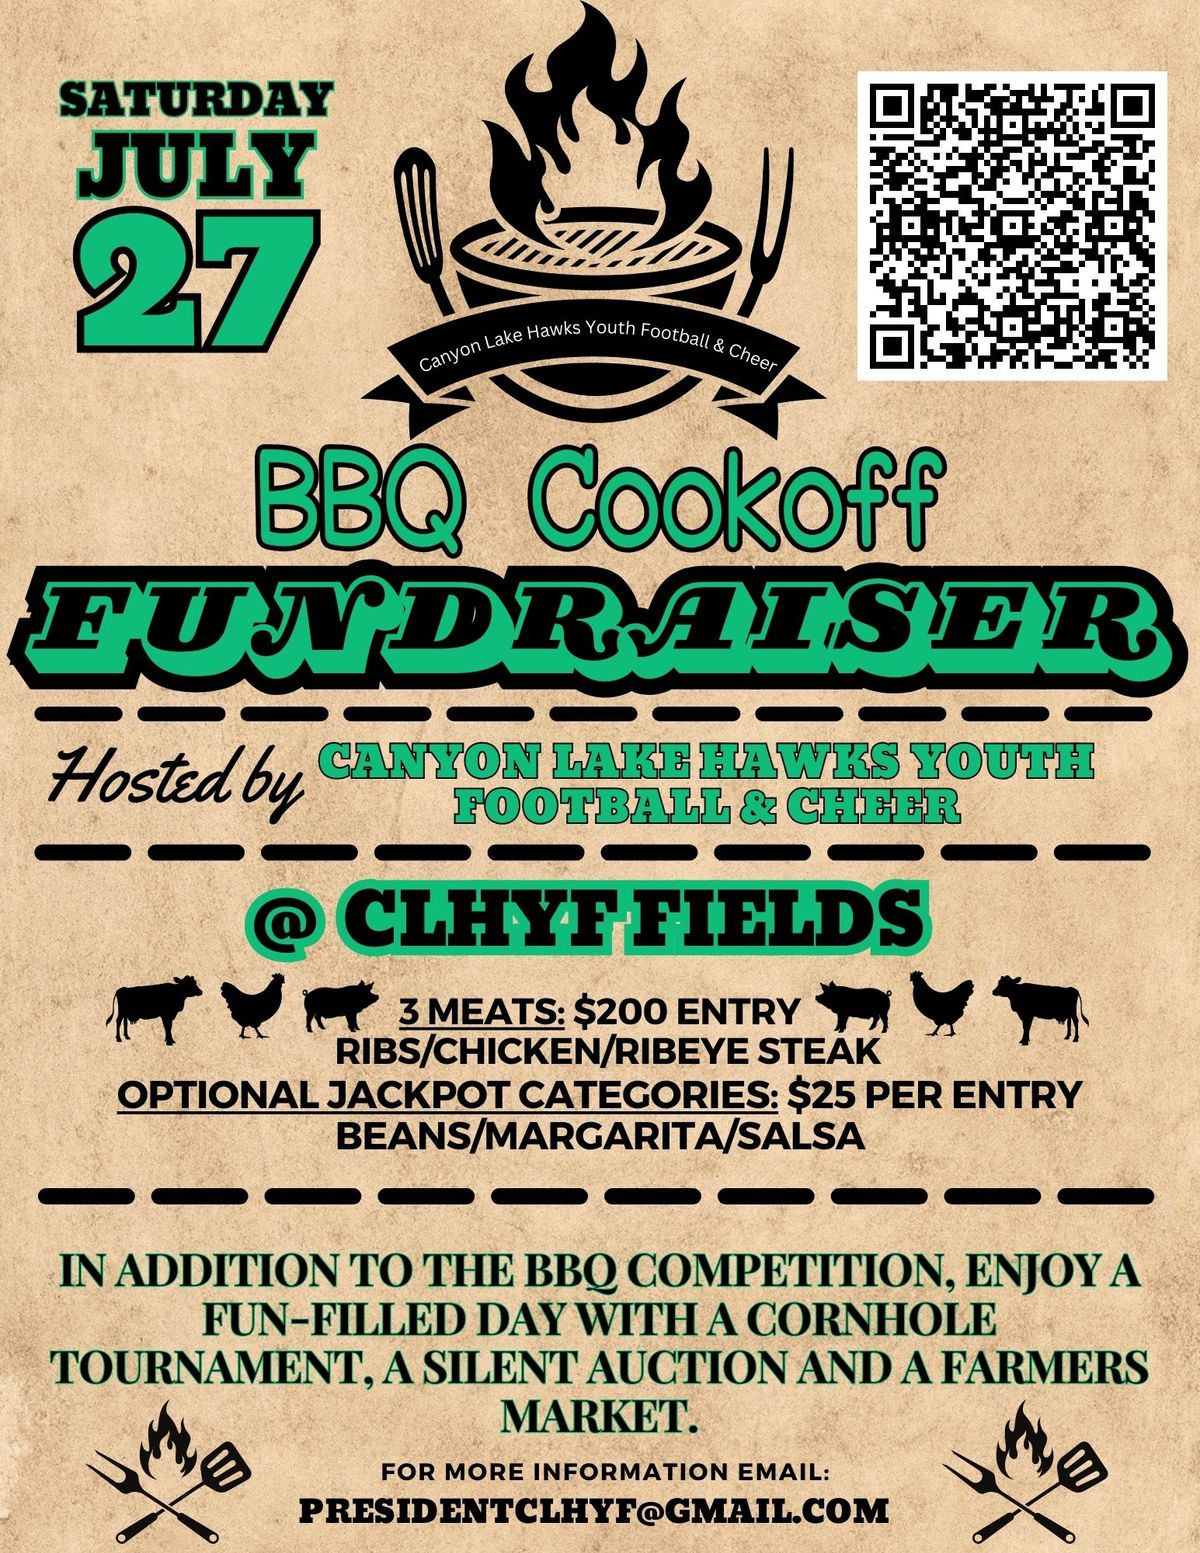 First Annual BBQ Cookoff Fundraiser and Cornhole Tournament